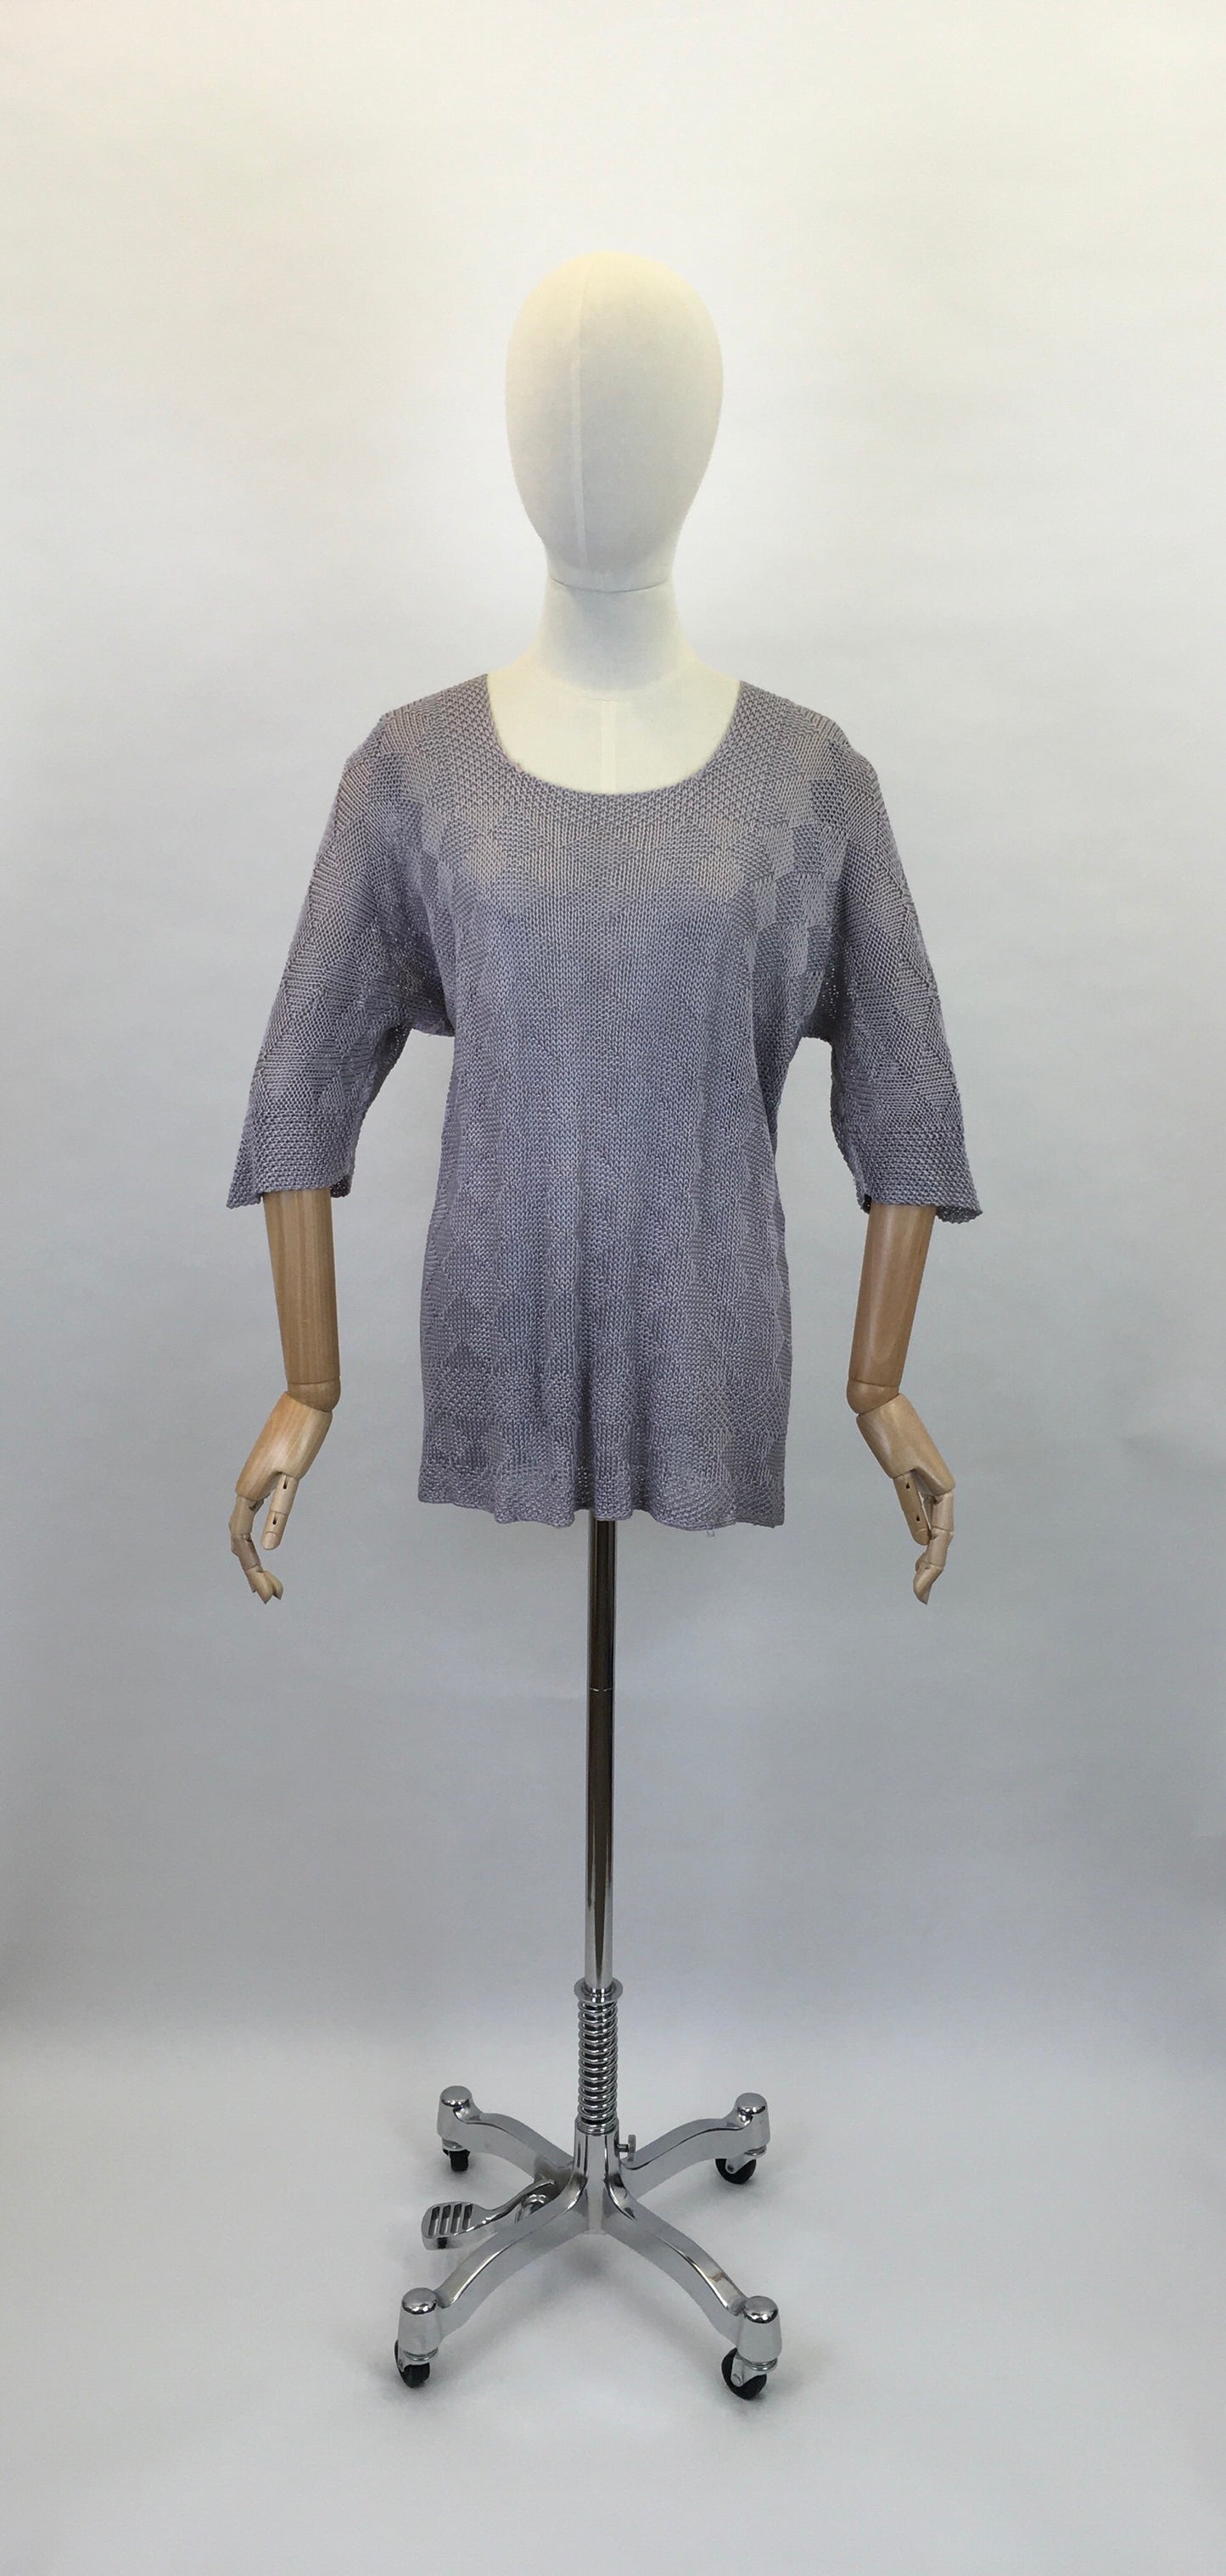 Original 1930s Knitted Tunic in Soft Lavender - Featuring Harlequin Pattern and Shapes Hemline